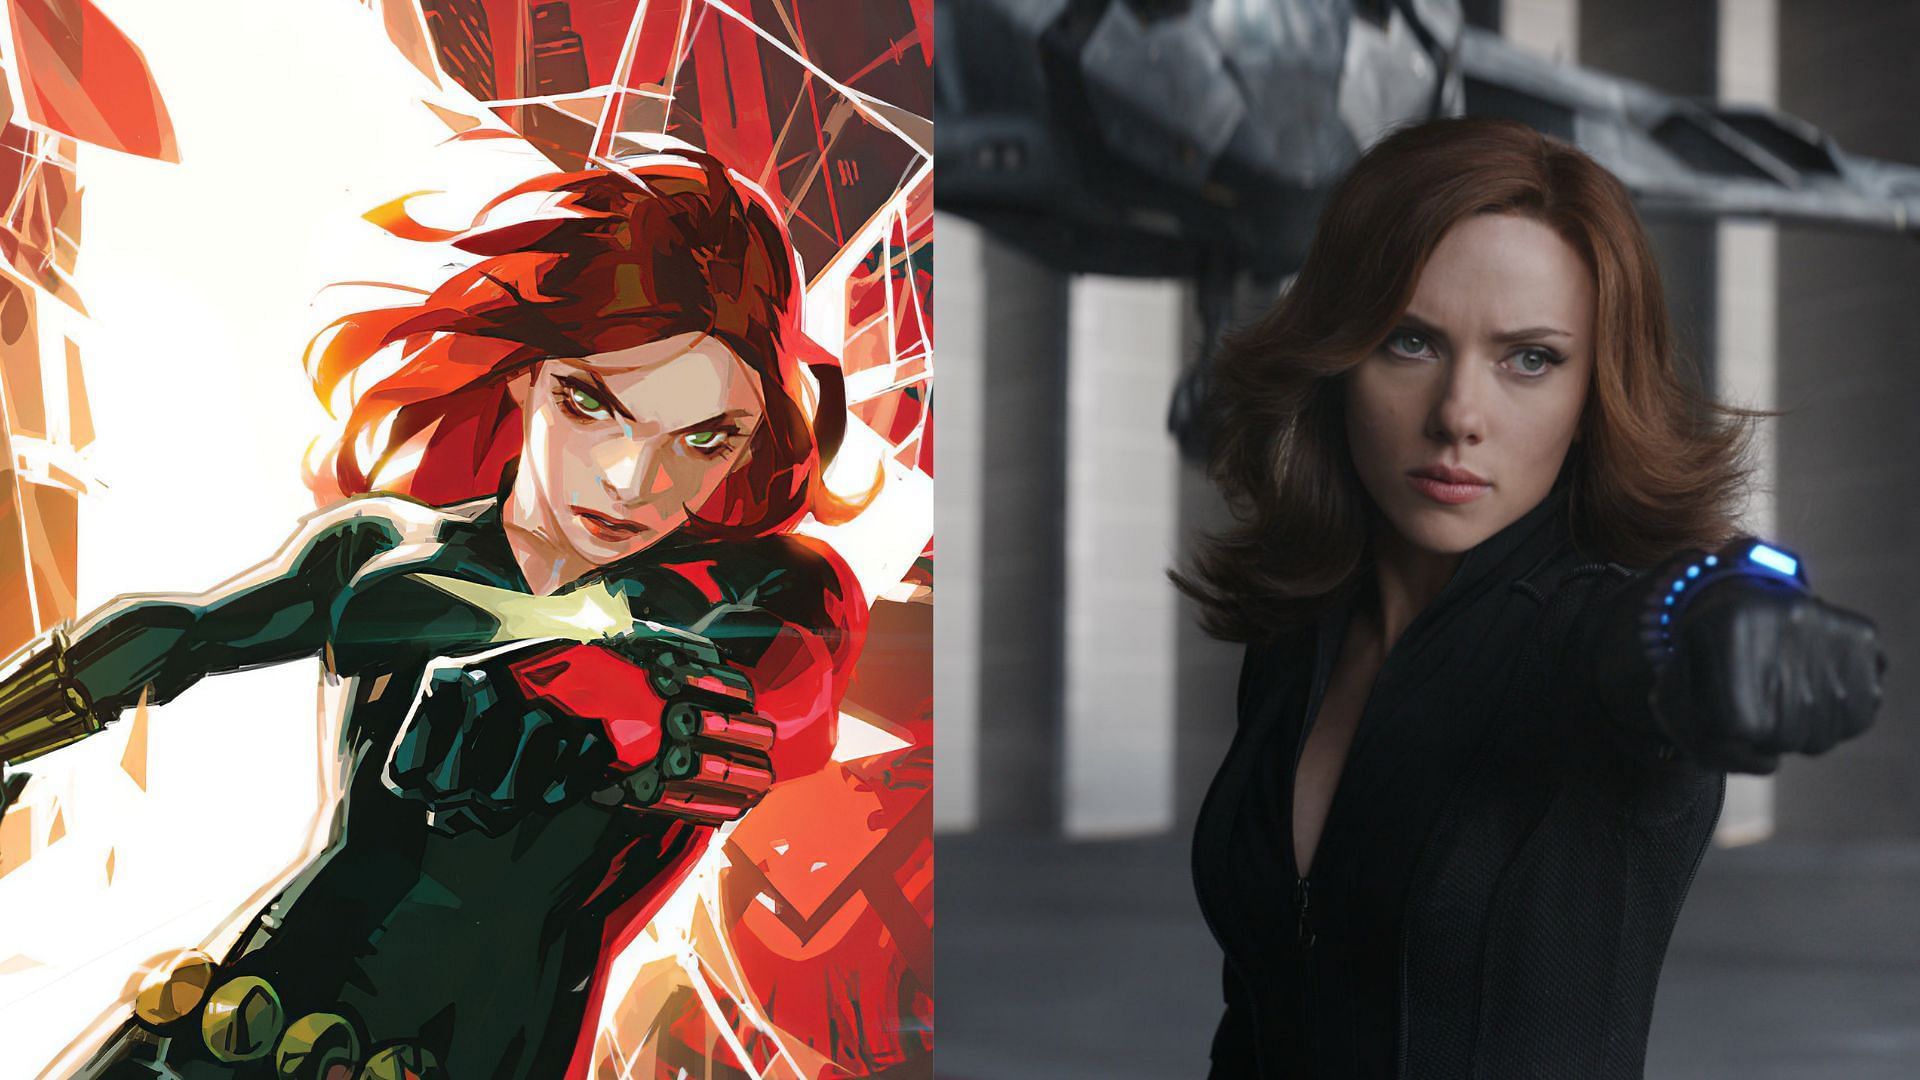 Left: Black Widow in comics, Right: Black Widow played by Scarlett Johansson in the MCU (Images via Marvel)